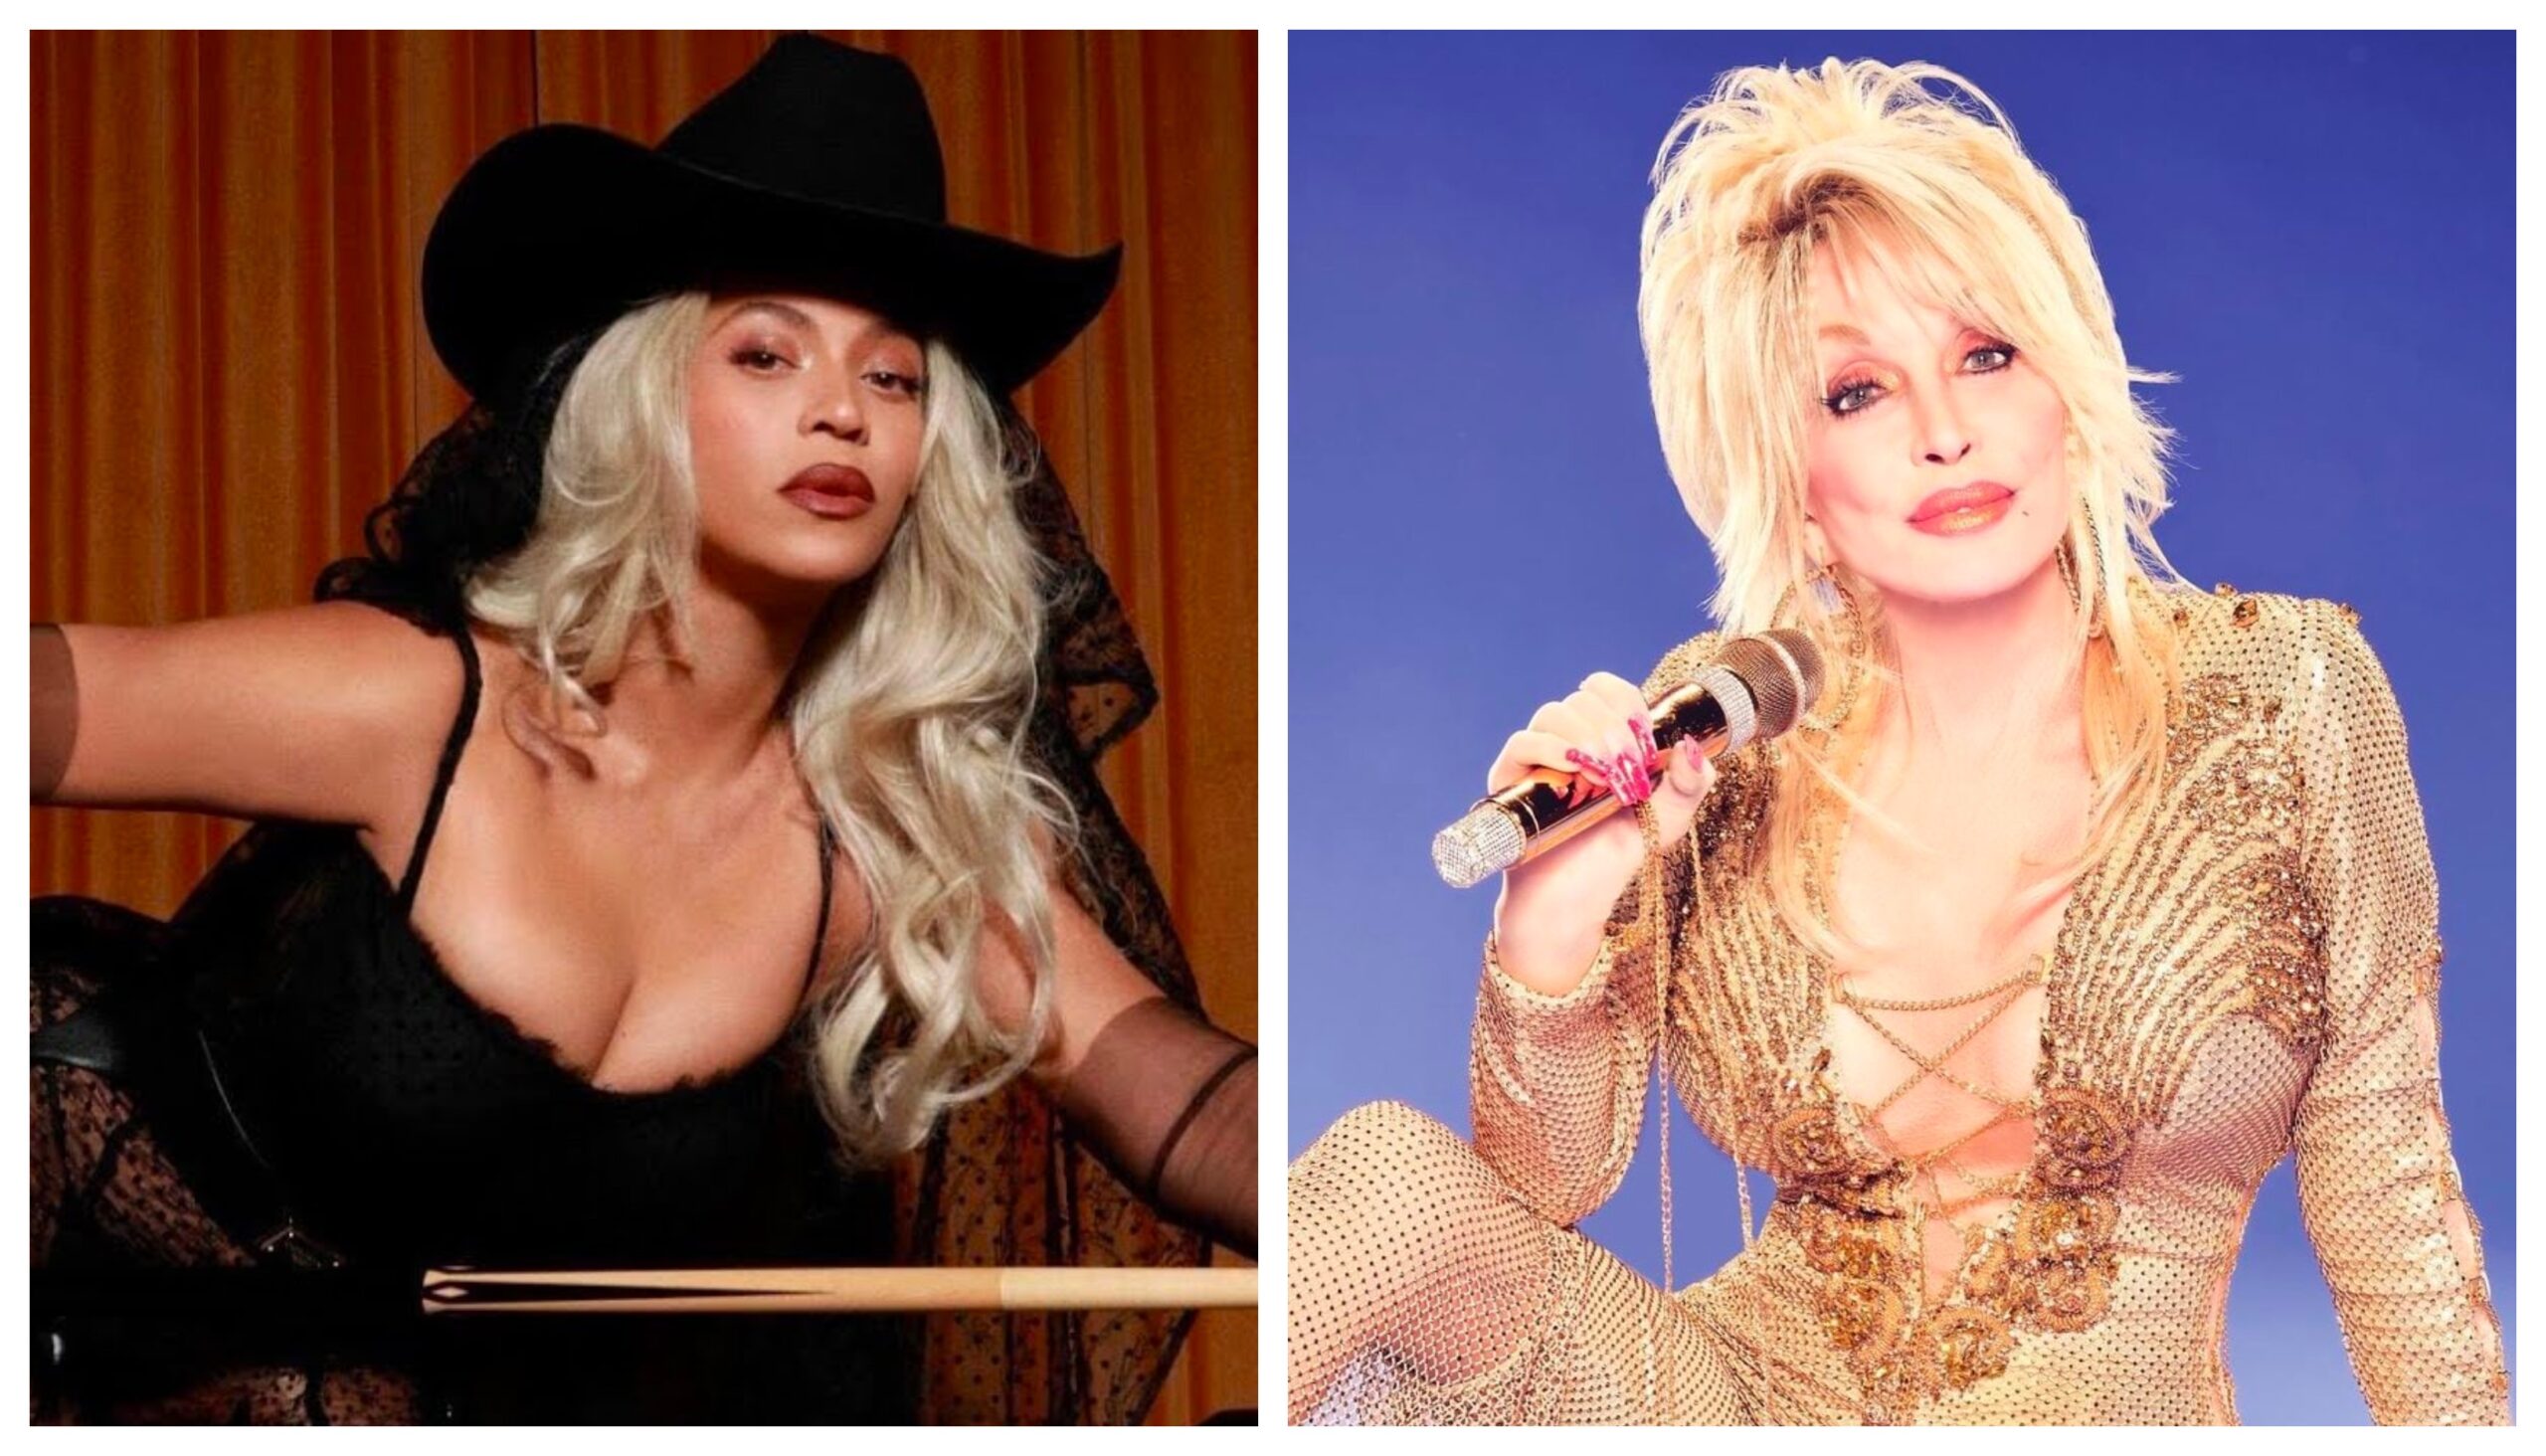 Dolly Parton Congratulates Beyonce on Country Chart #1: “Can’t Wait to Hear the Album”